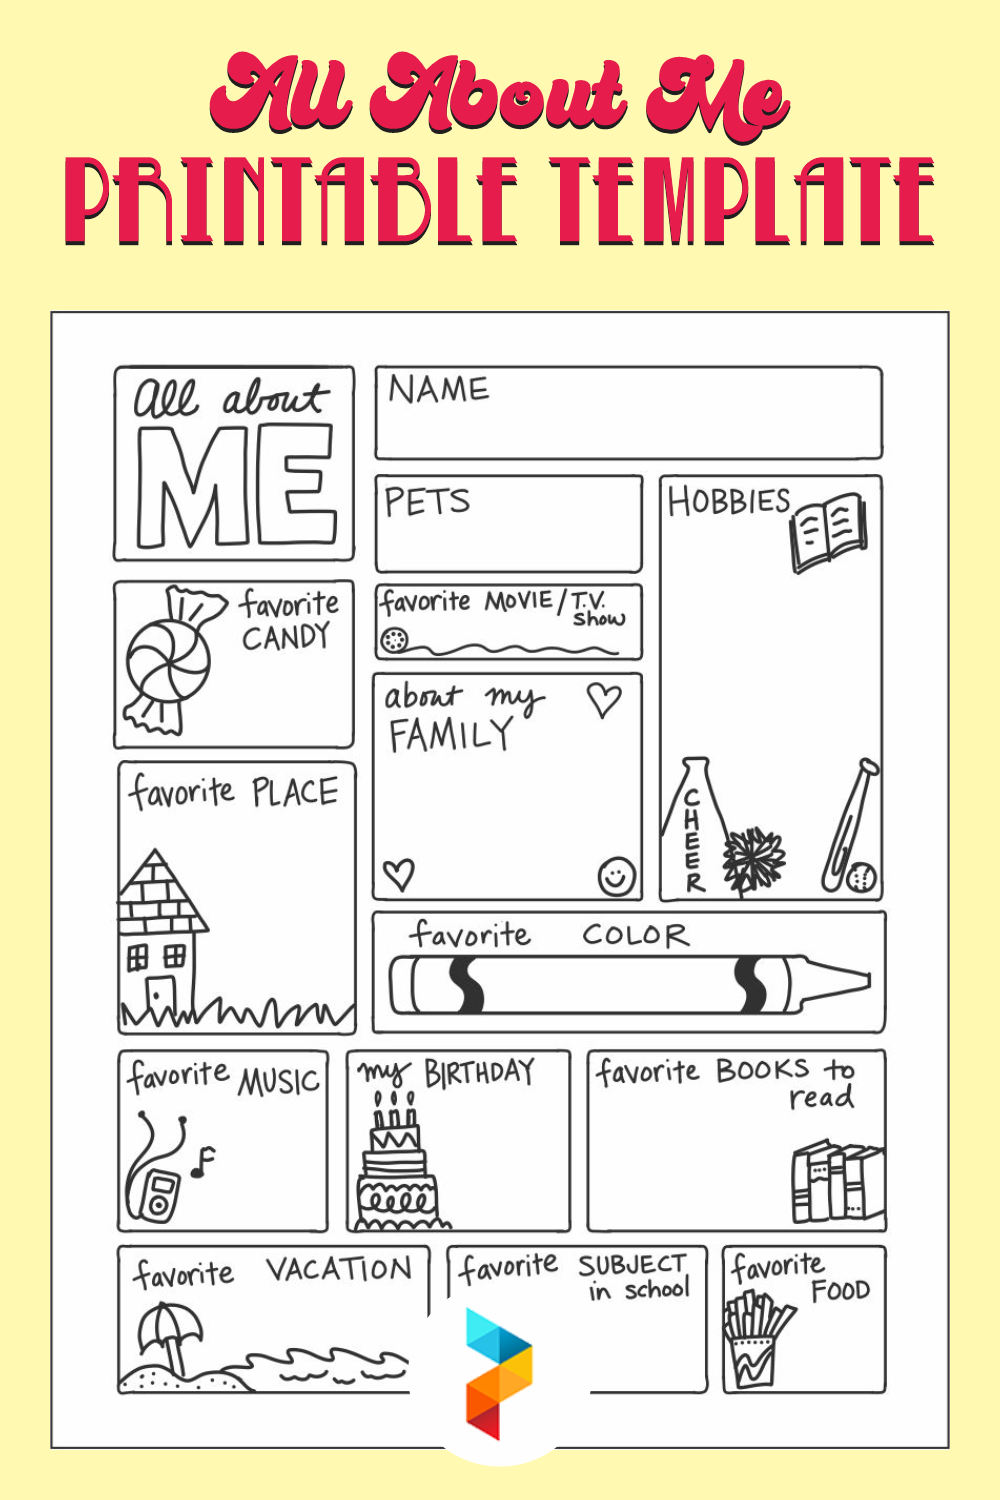 all-about-me-template-printable-printable-templates